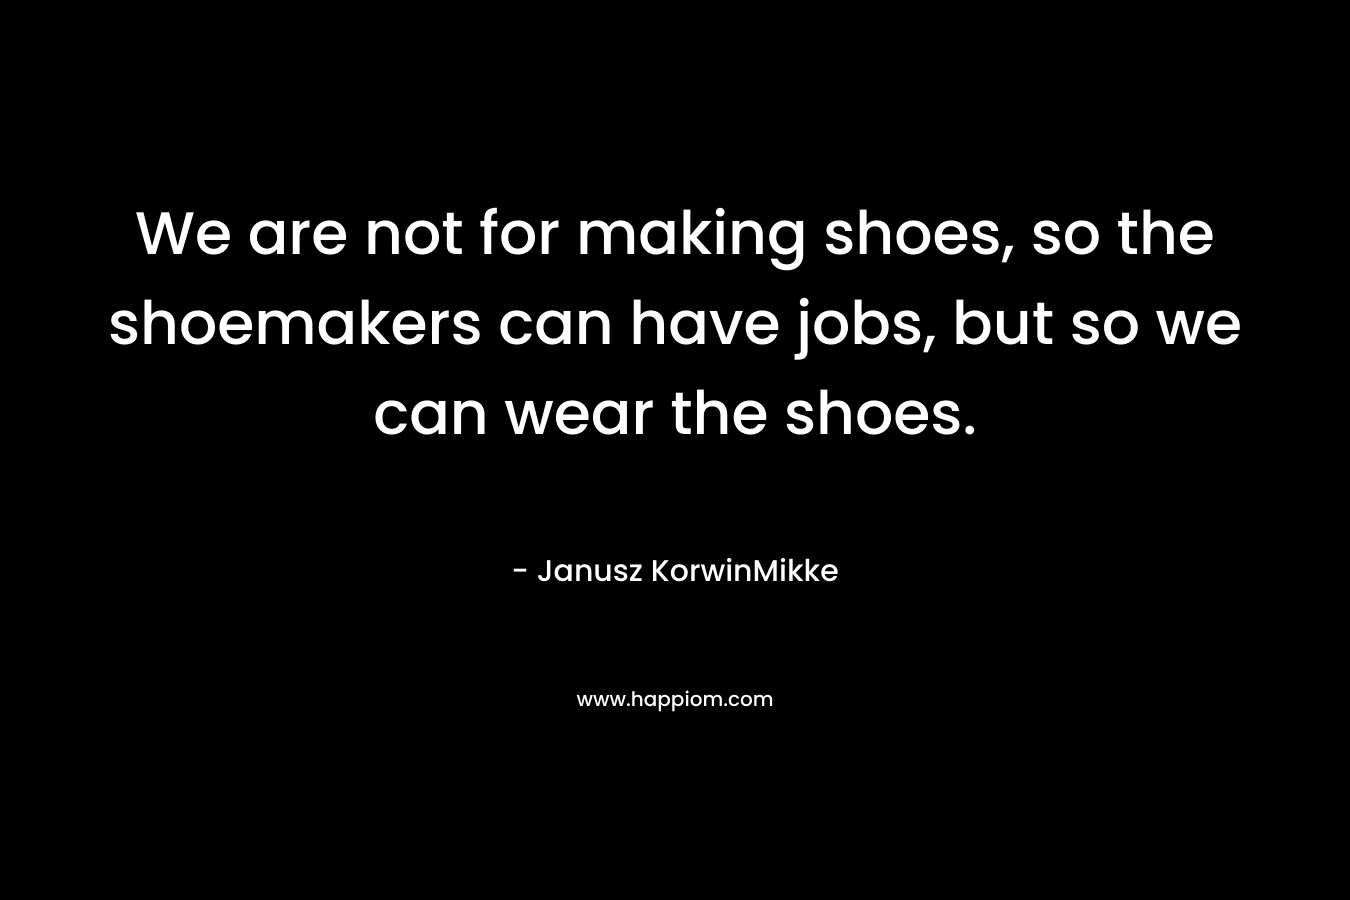 We are not for making shoes, so the shoemakers can have jobs, but so we can wear the shoes. – Janusz KorwinMikke